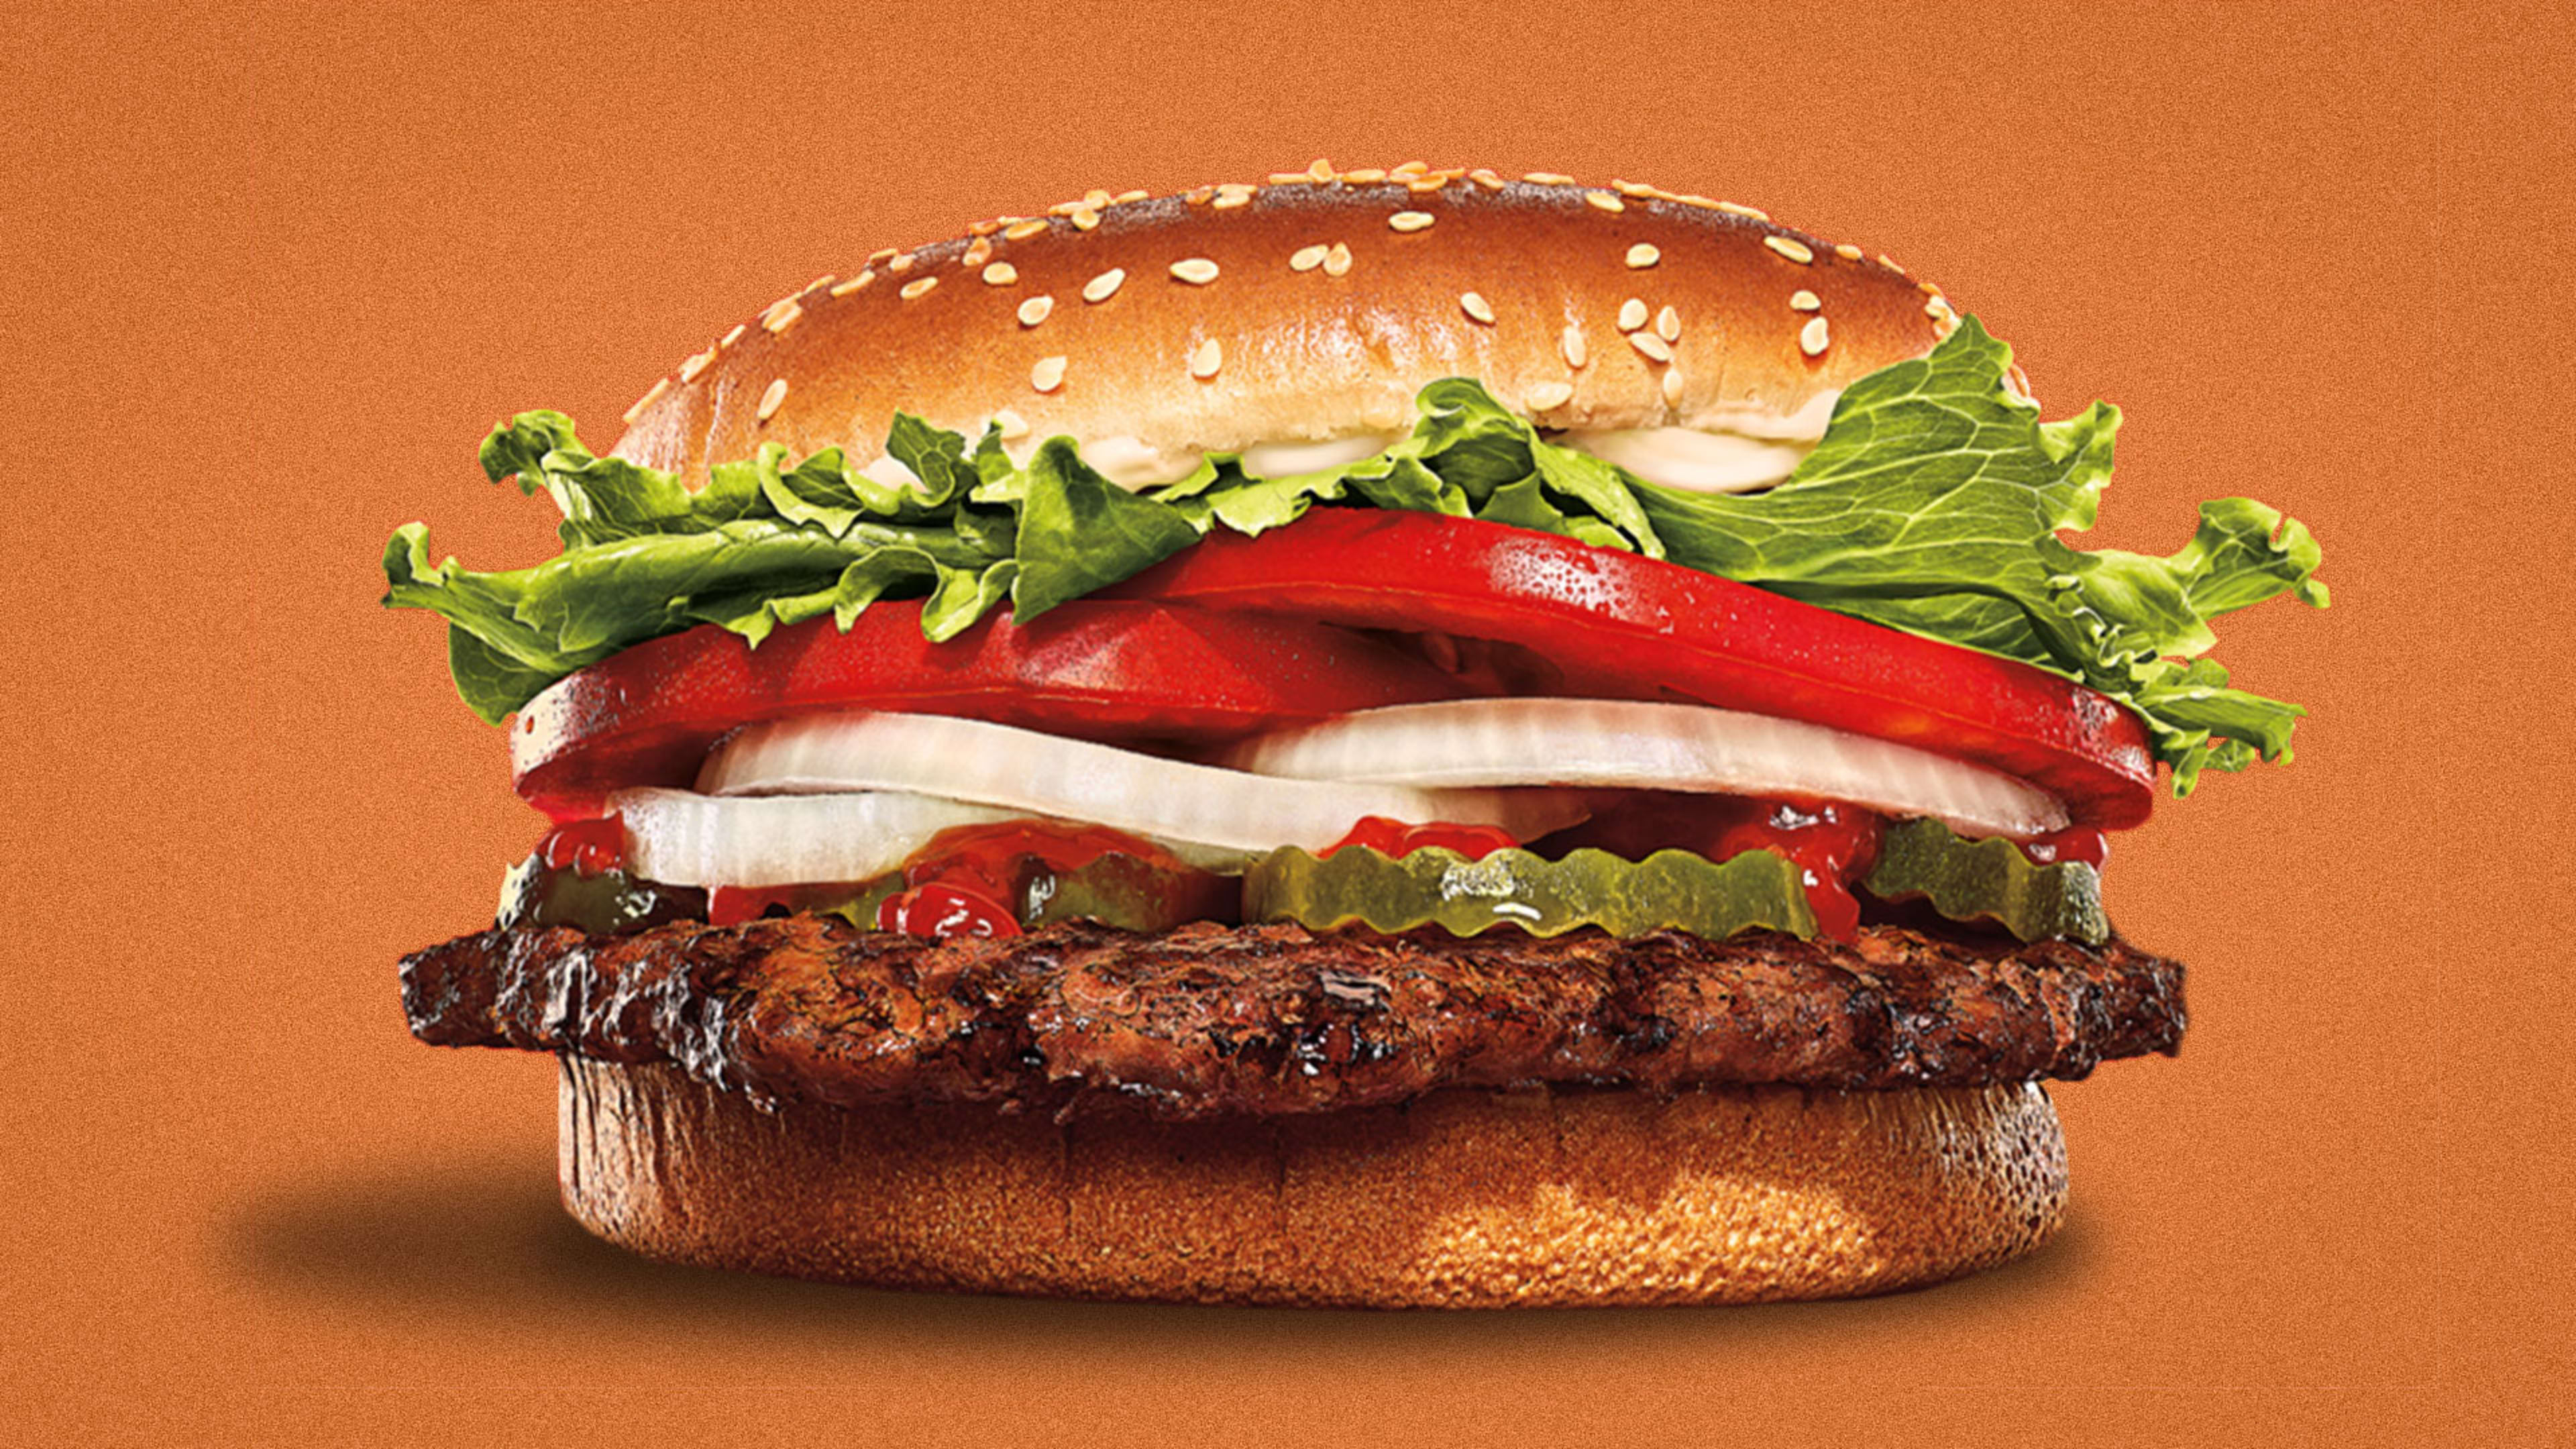 Burger King's Whopper turns 64: Grab one for 37 cents this week 